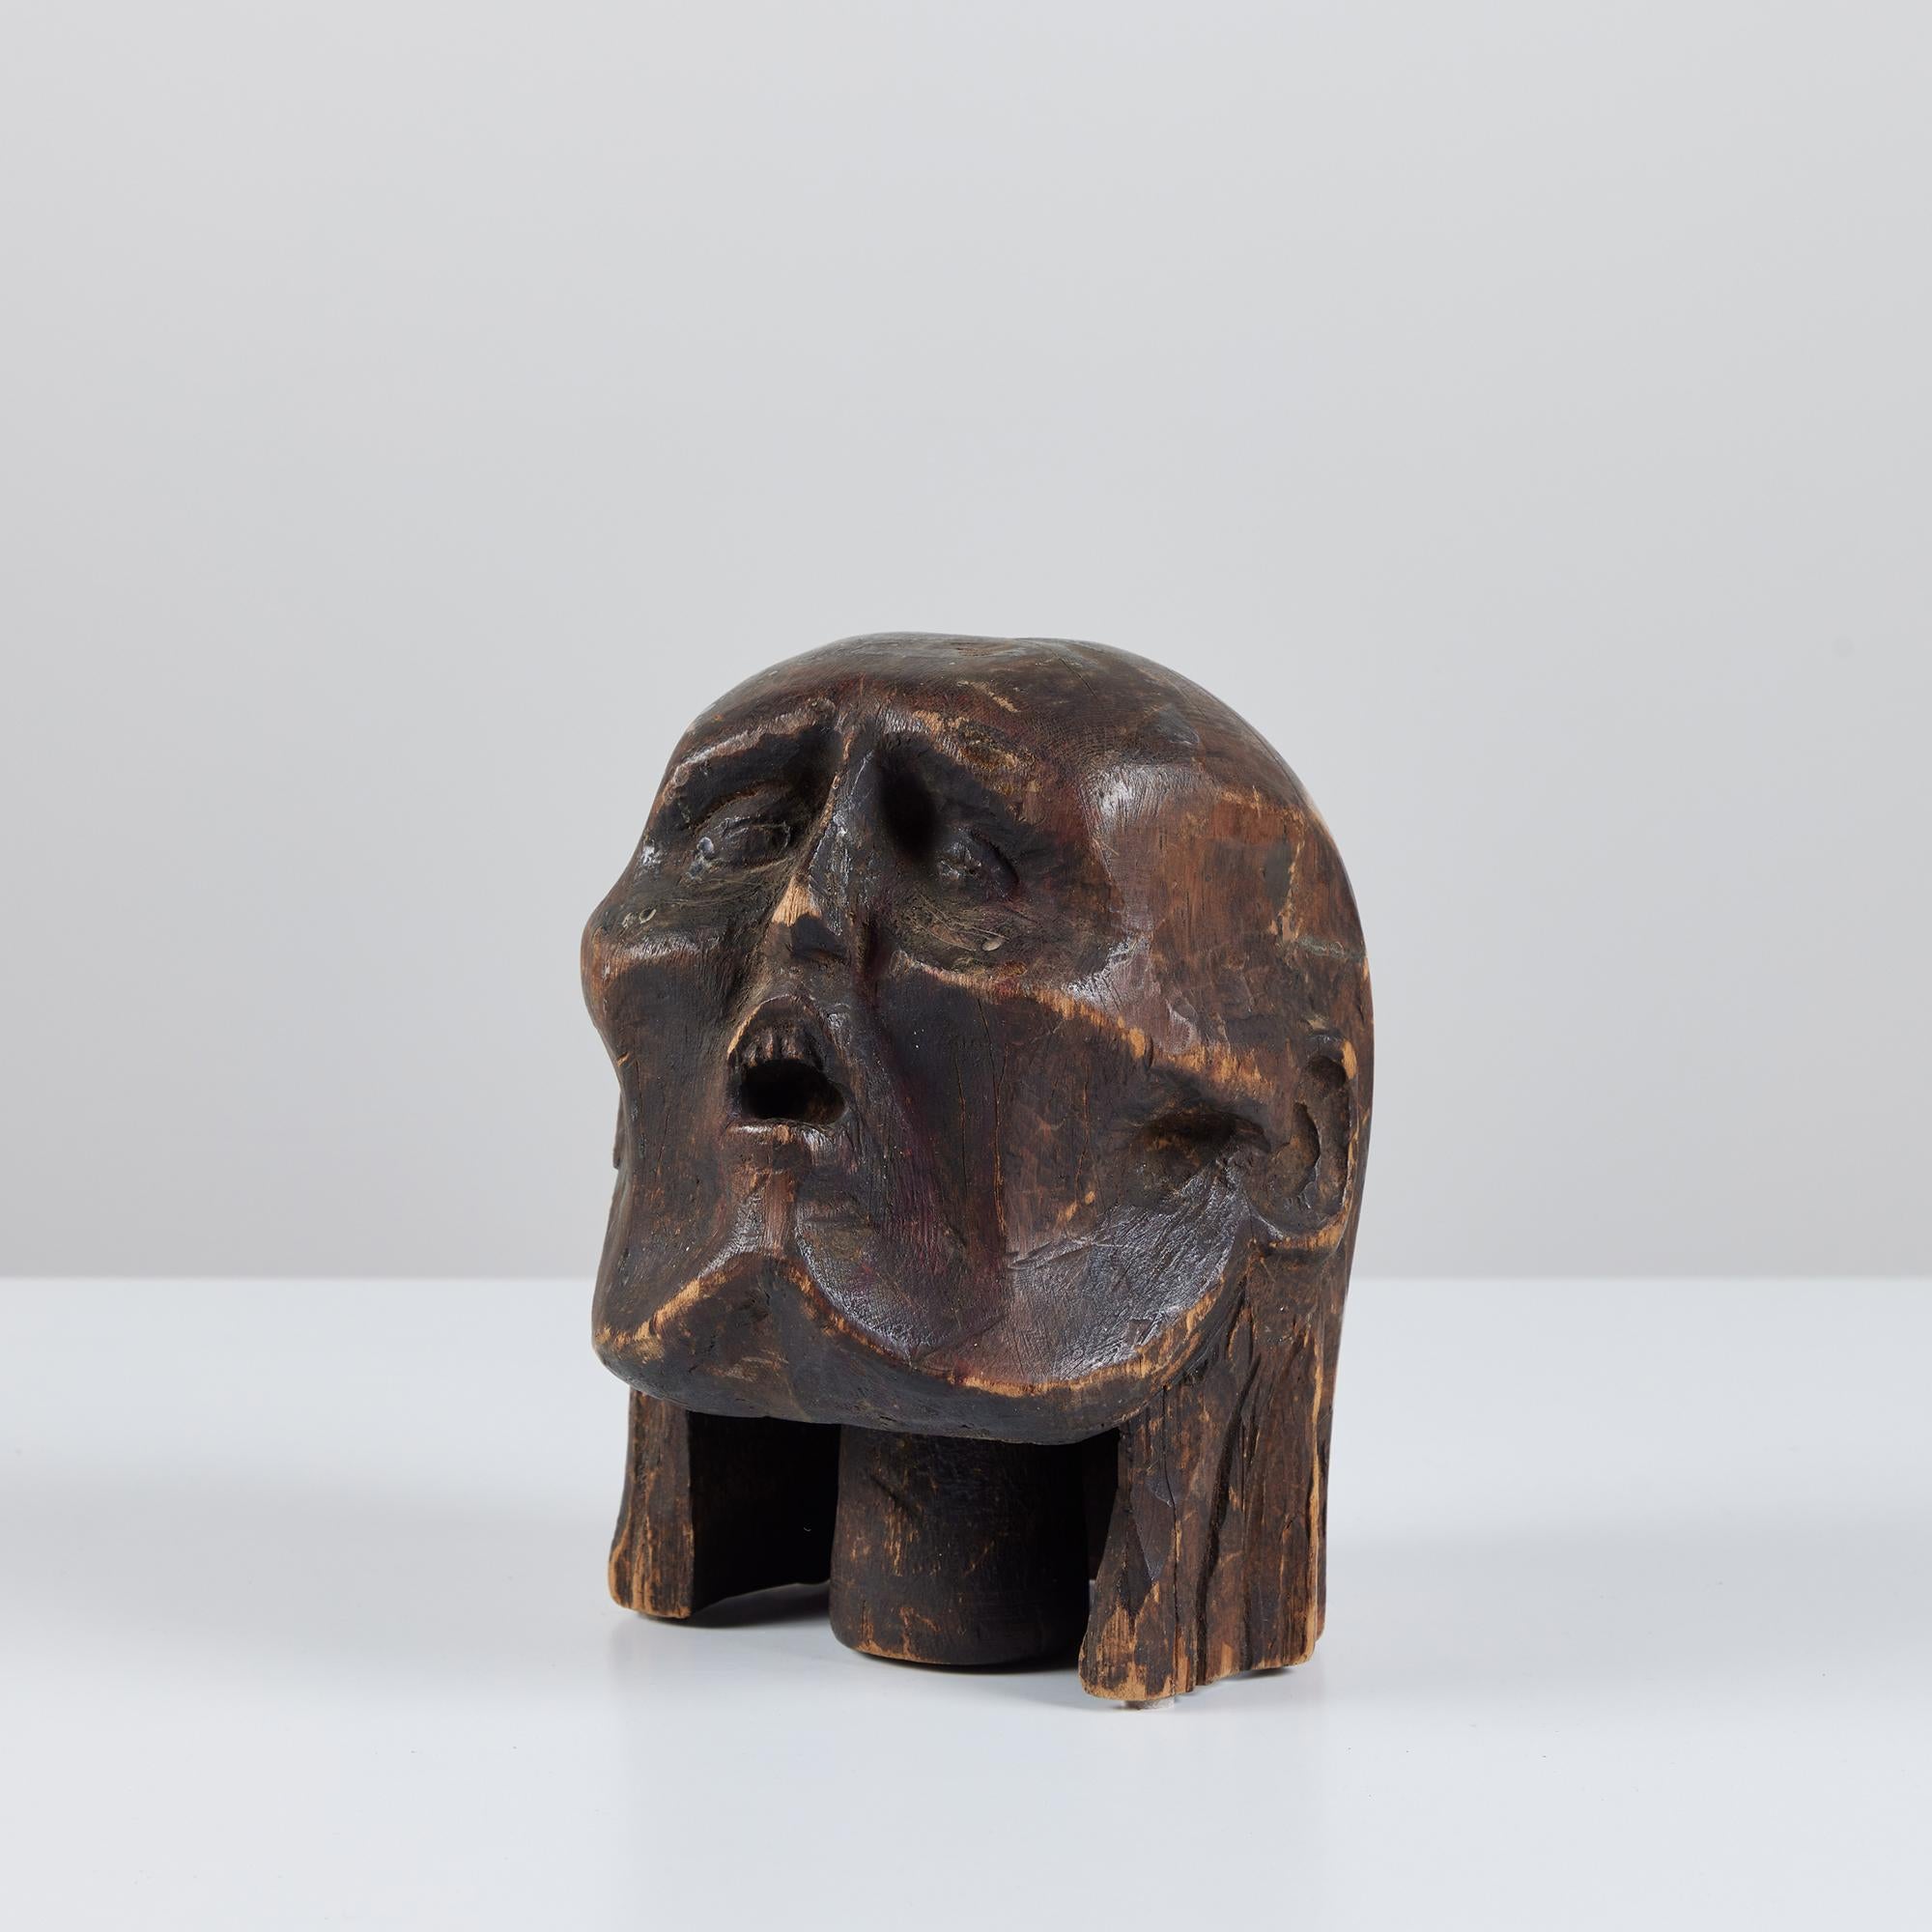 Hand-carved wooden head displays two varying wood tones throughout. The piece has been patinated to the point of perfection. Carved from a solid piece of wood this piece features a gaunt appearance and sunken eyes with partially open